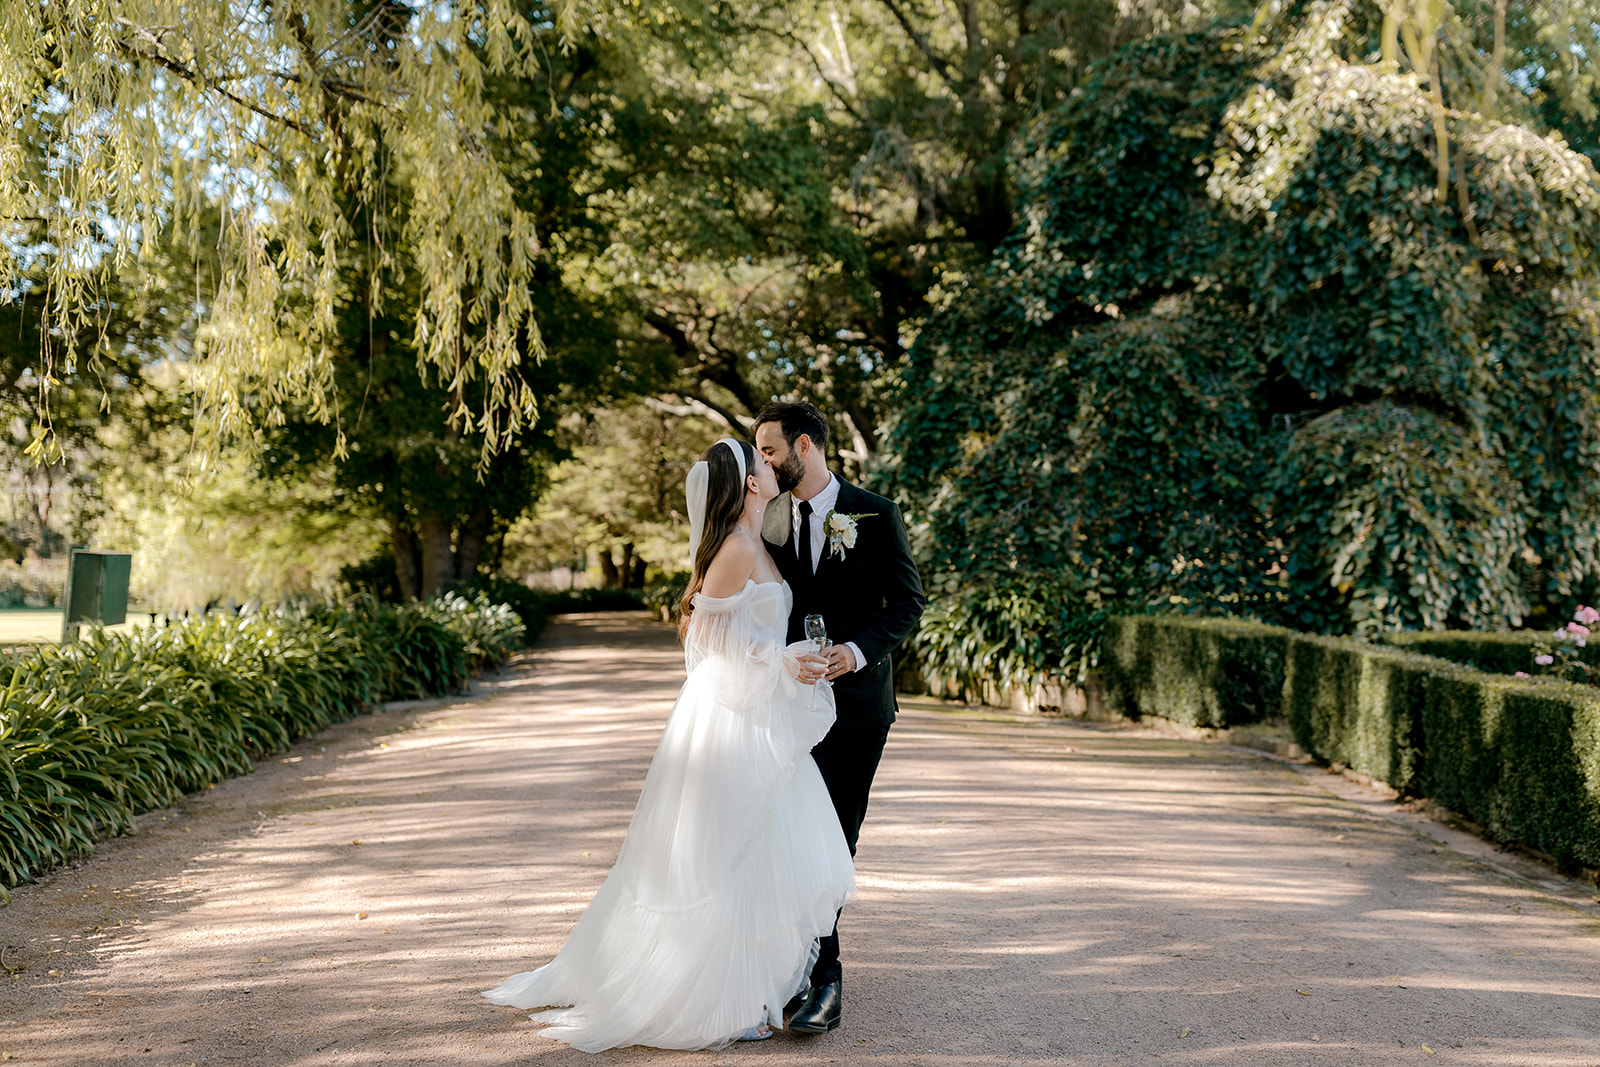 Portrait of bride & groom kissing in an English-inspired garden during their elegant country wedding.